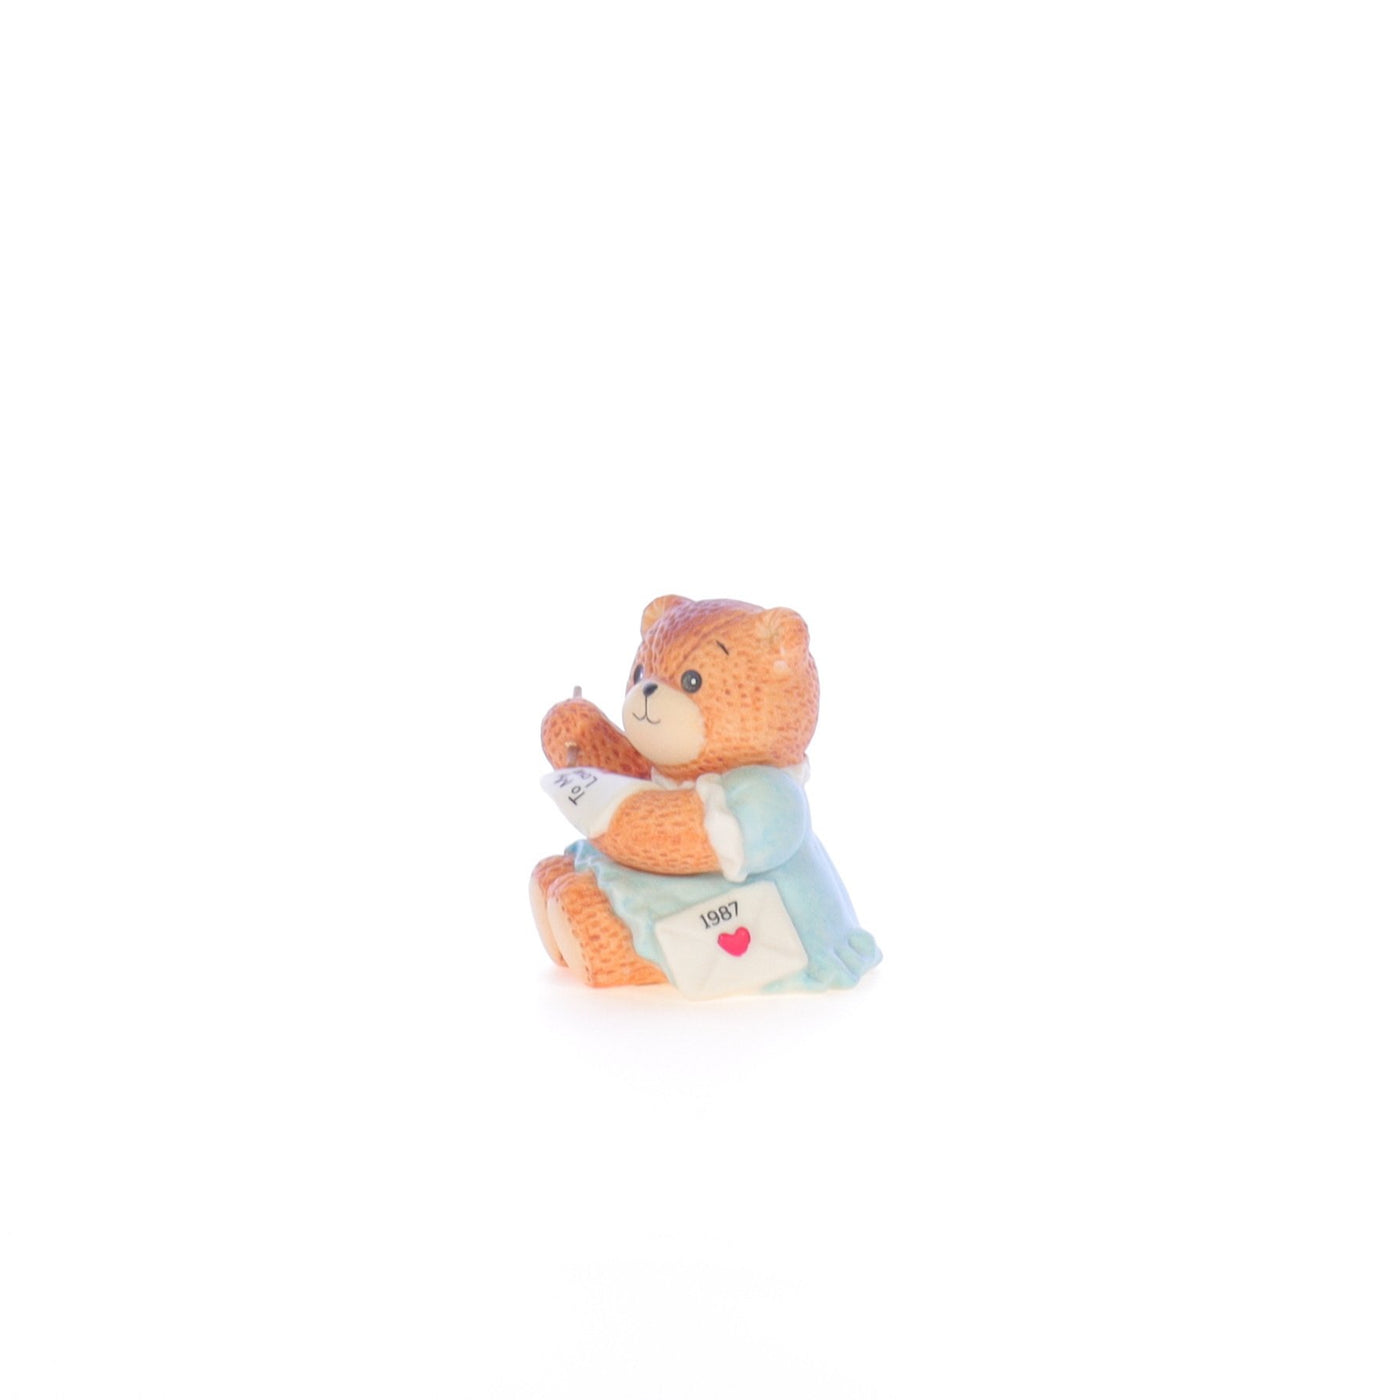 Lucy_And_Me_by_Lucy_Atwell_Porcelain_Figurine_Bear_Writing_Valentine_Lucy_Unknown_020_02